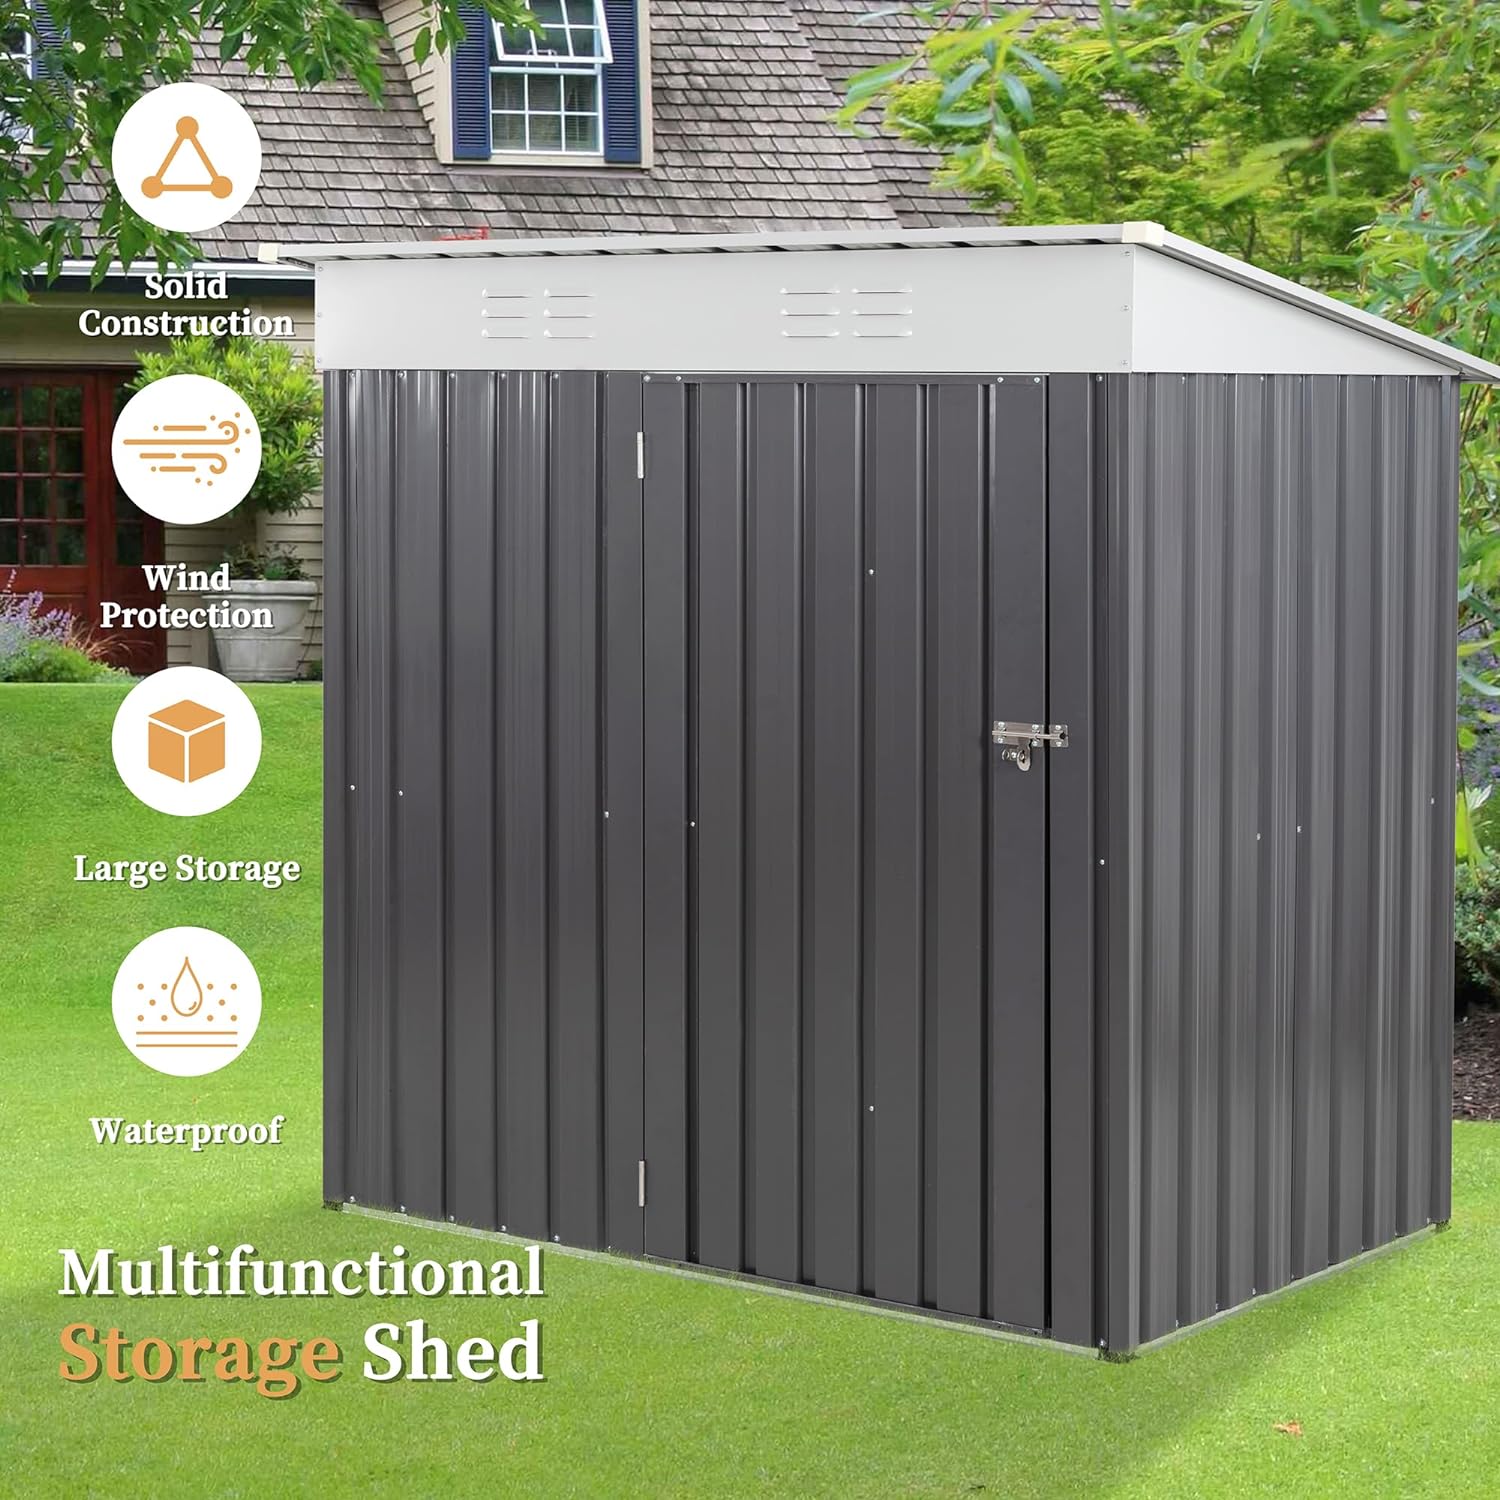 vongrasig outdoor storage shed review